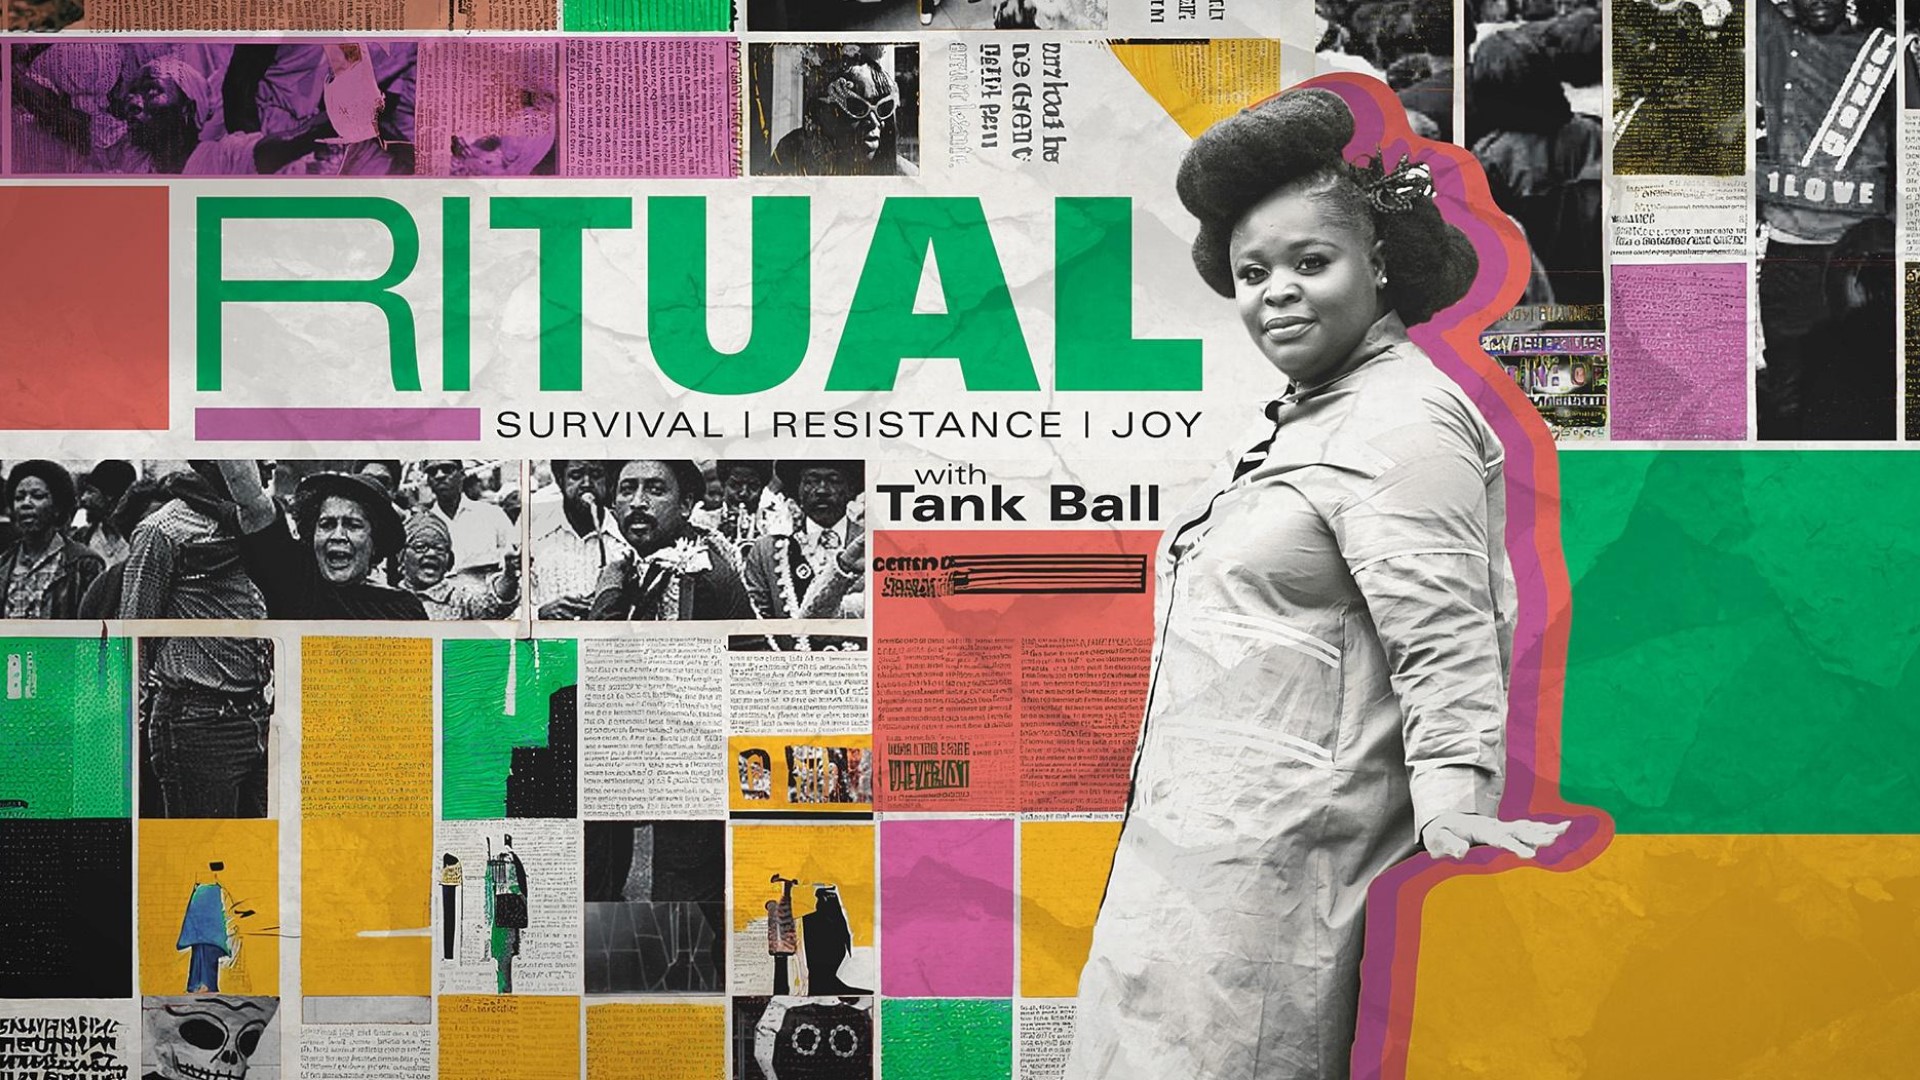 Tank hosts Ritual, a series commissioned by PBS, that explores how history, customs, and rituals are rooted in New Orleans and across the South.